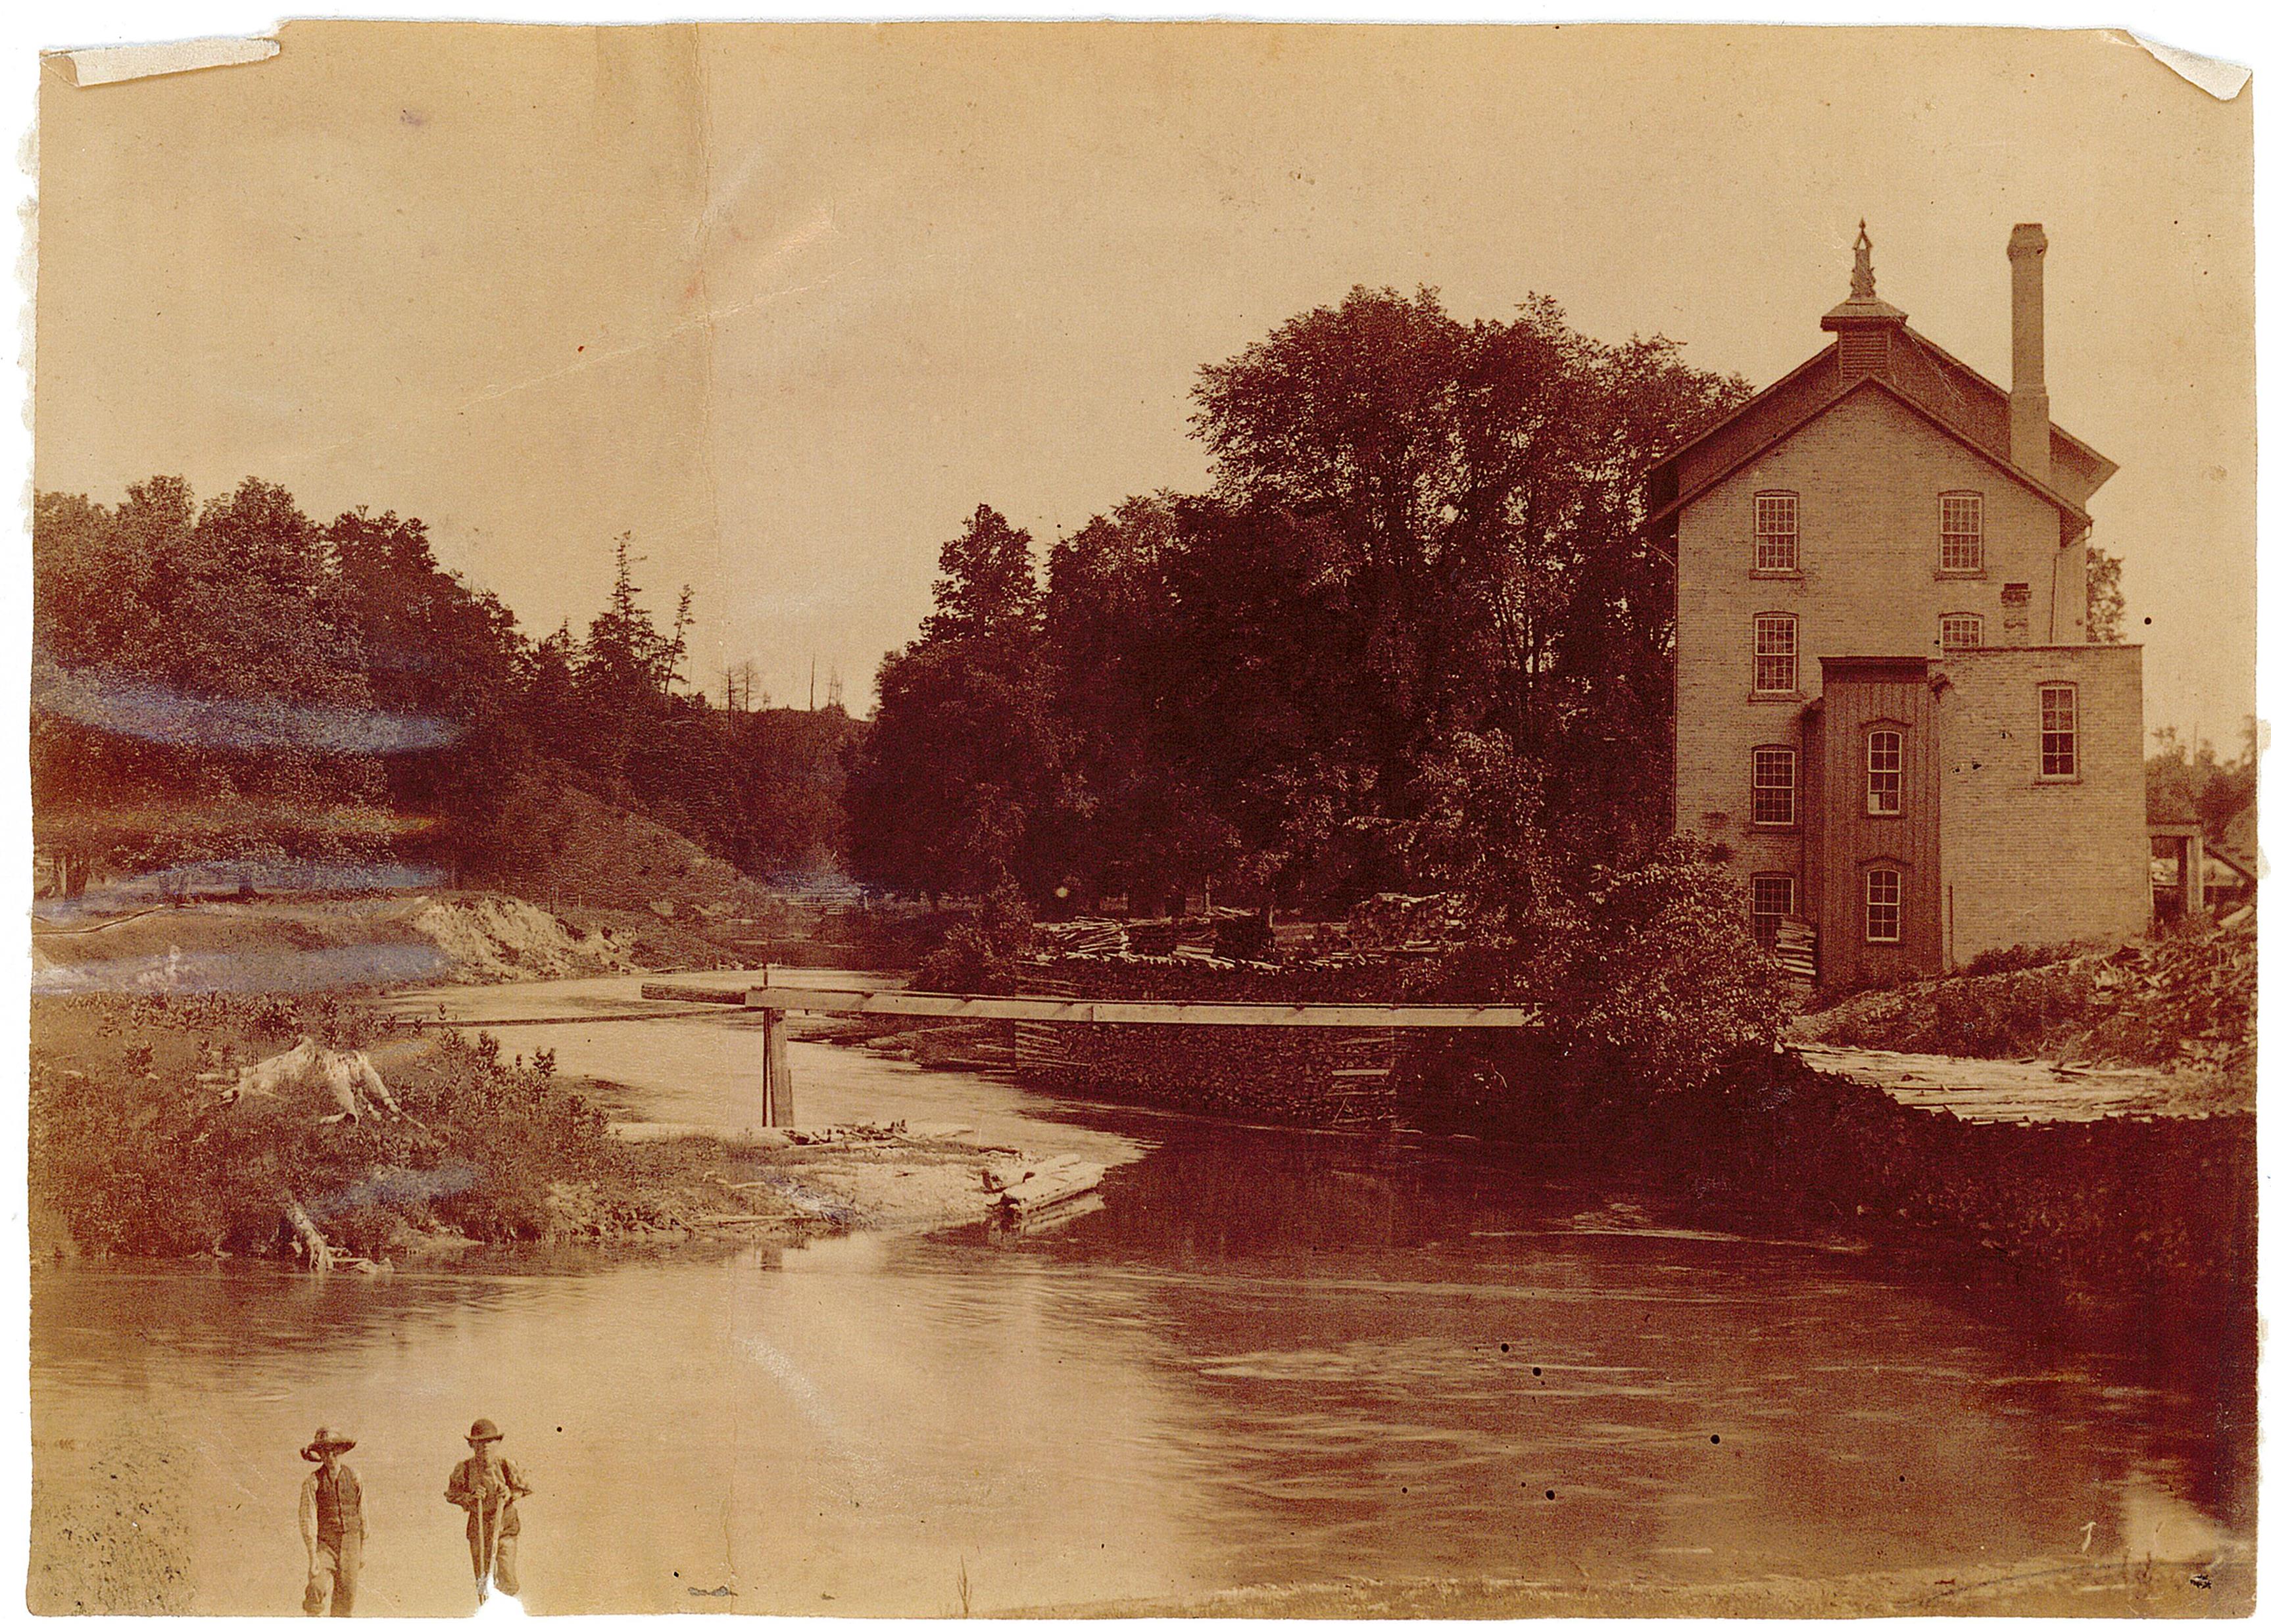 A view of E.D. Tillson's pea and barley mill, a four-storey brick building on a creek surrounded by trees.